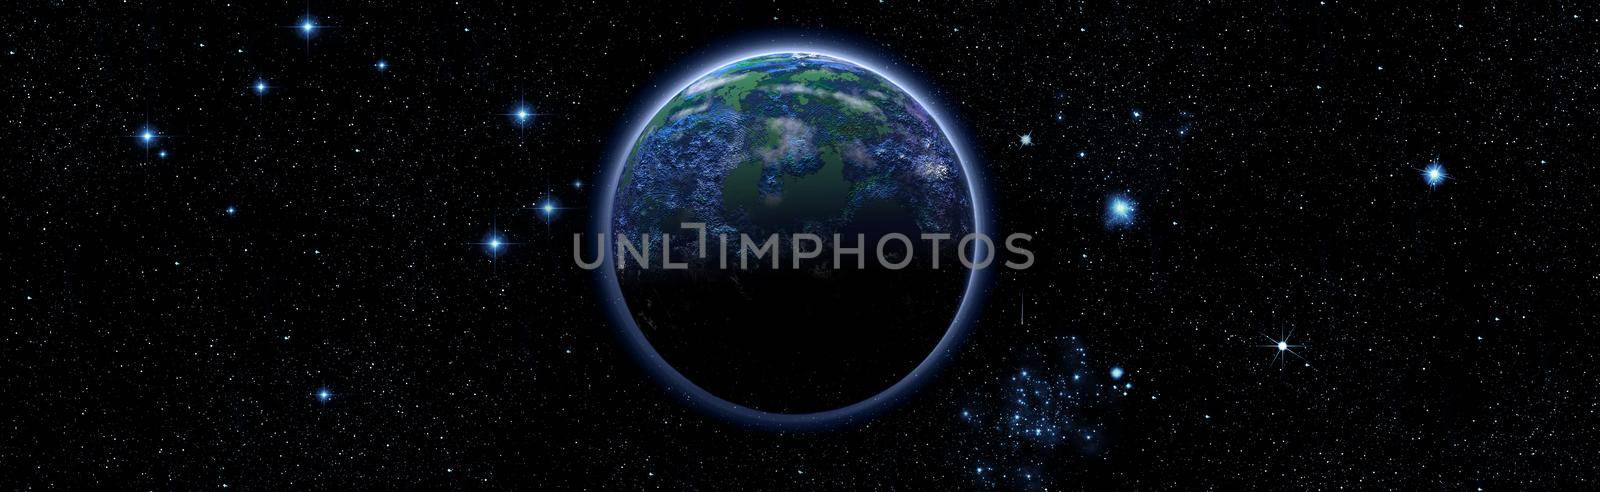 The Earth from space on a black background. by Maximusnd